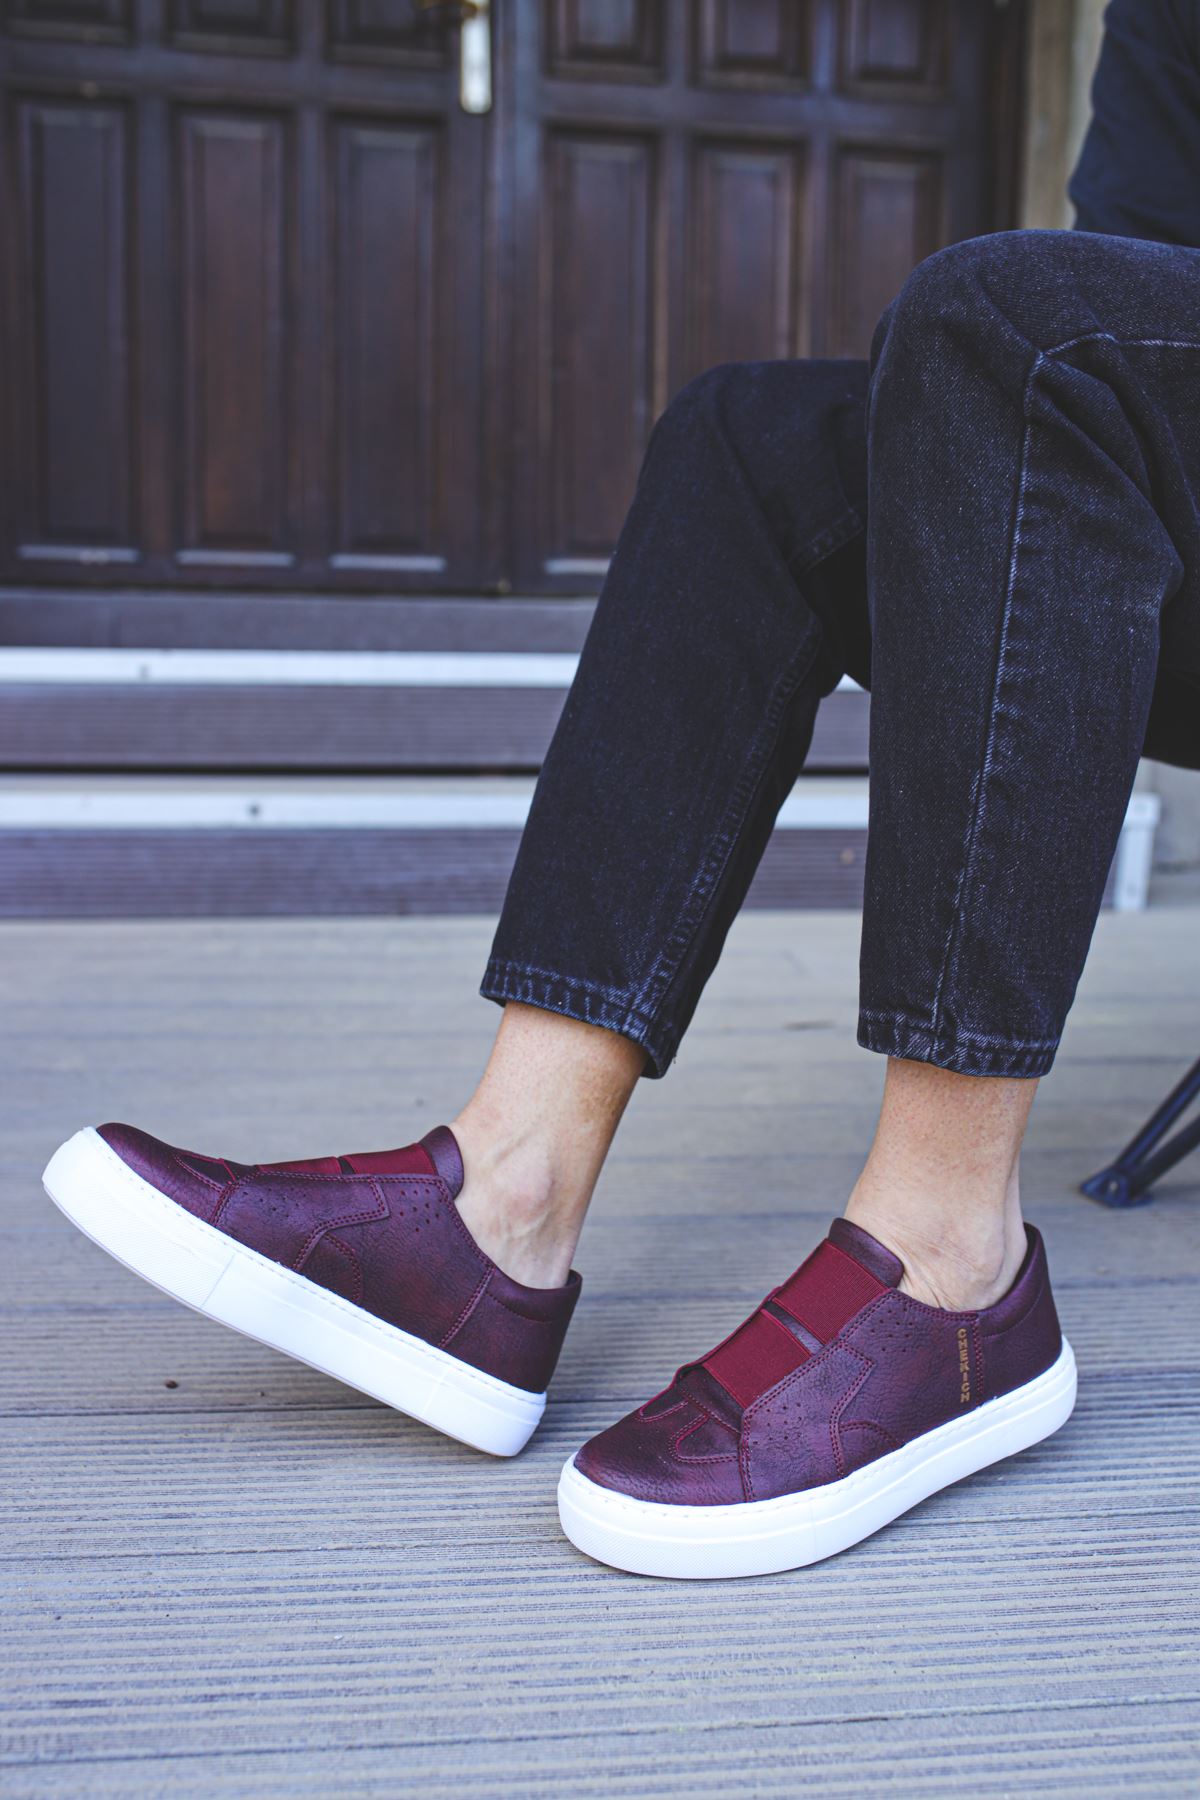 CH033 Men's Burgundy-White Sole Banded Casual Sneaker Sports Shoes - STREETMODE ™